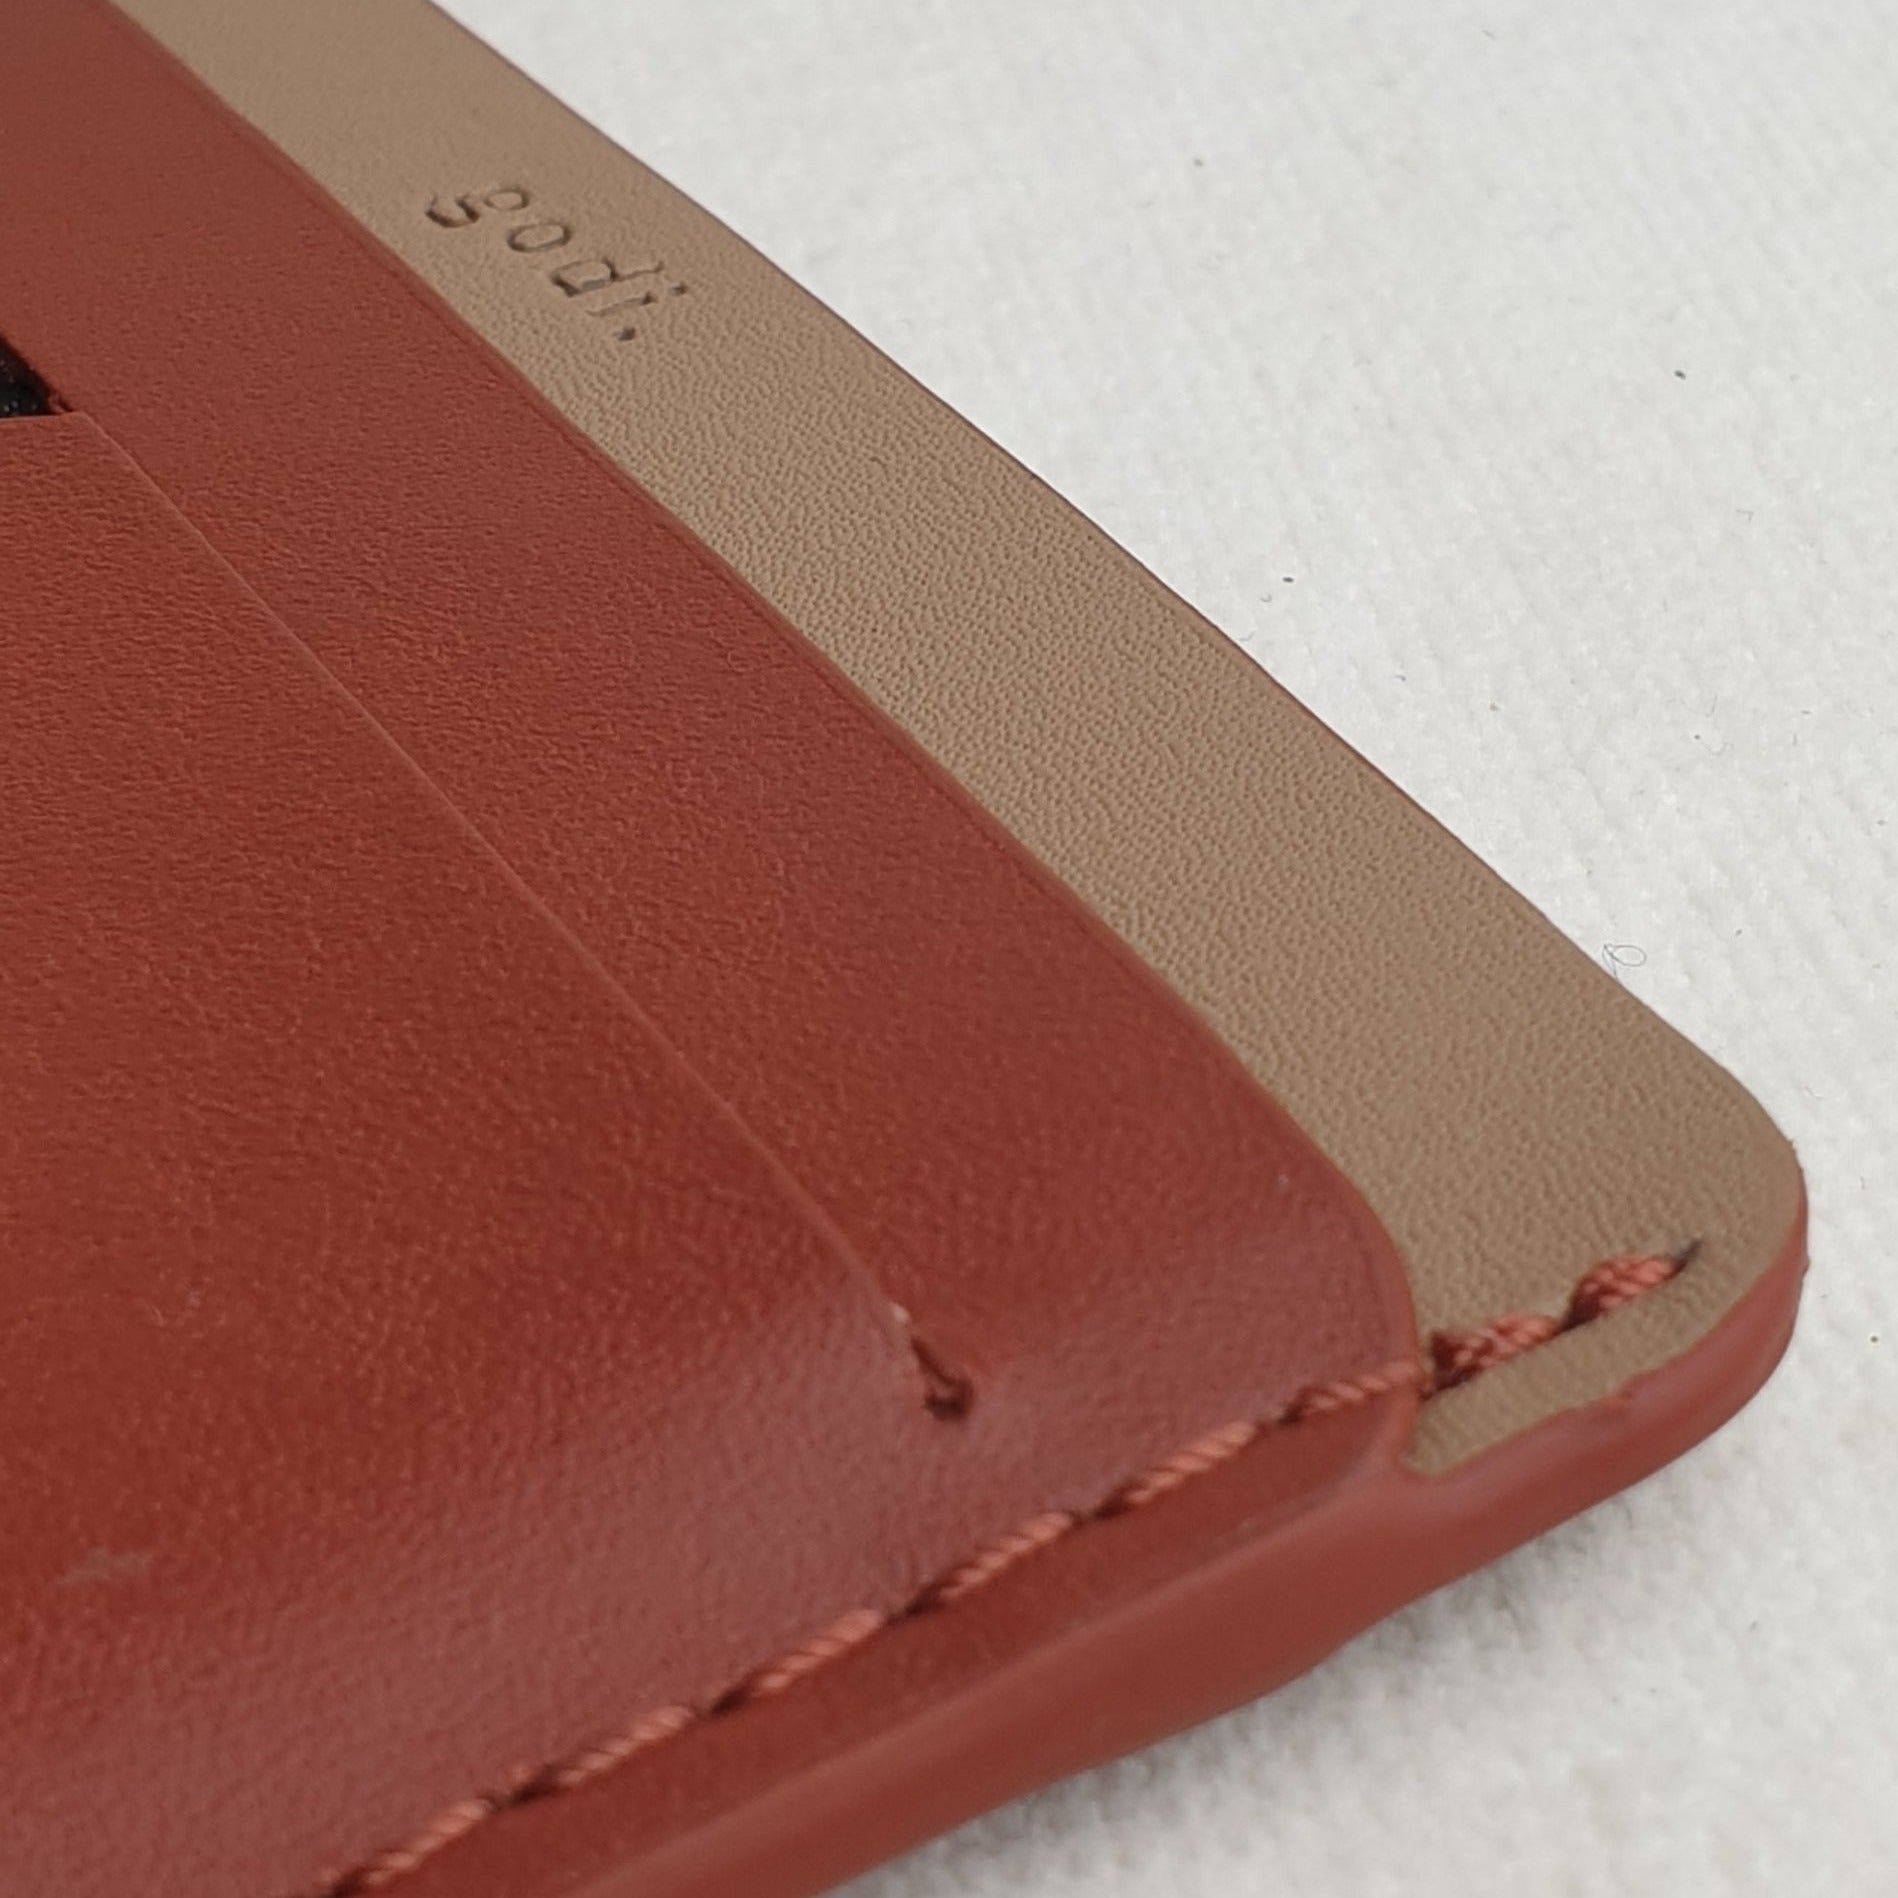 Slim Cardholder in Rust Brown and Sand